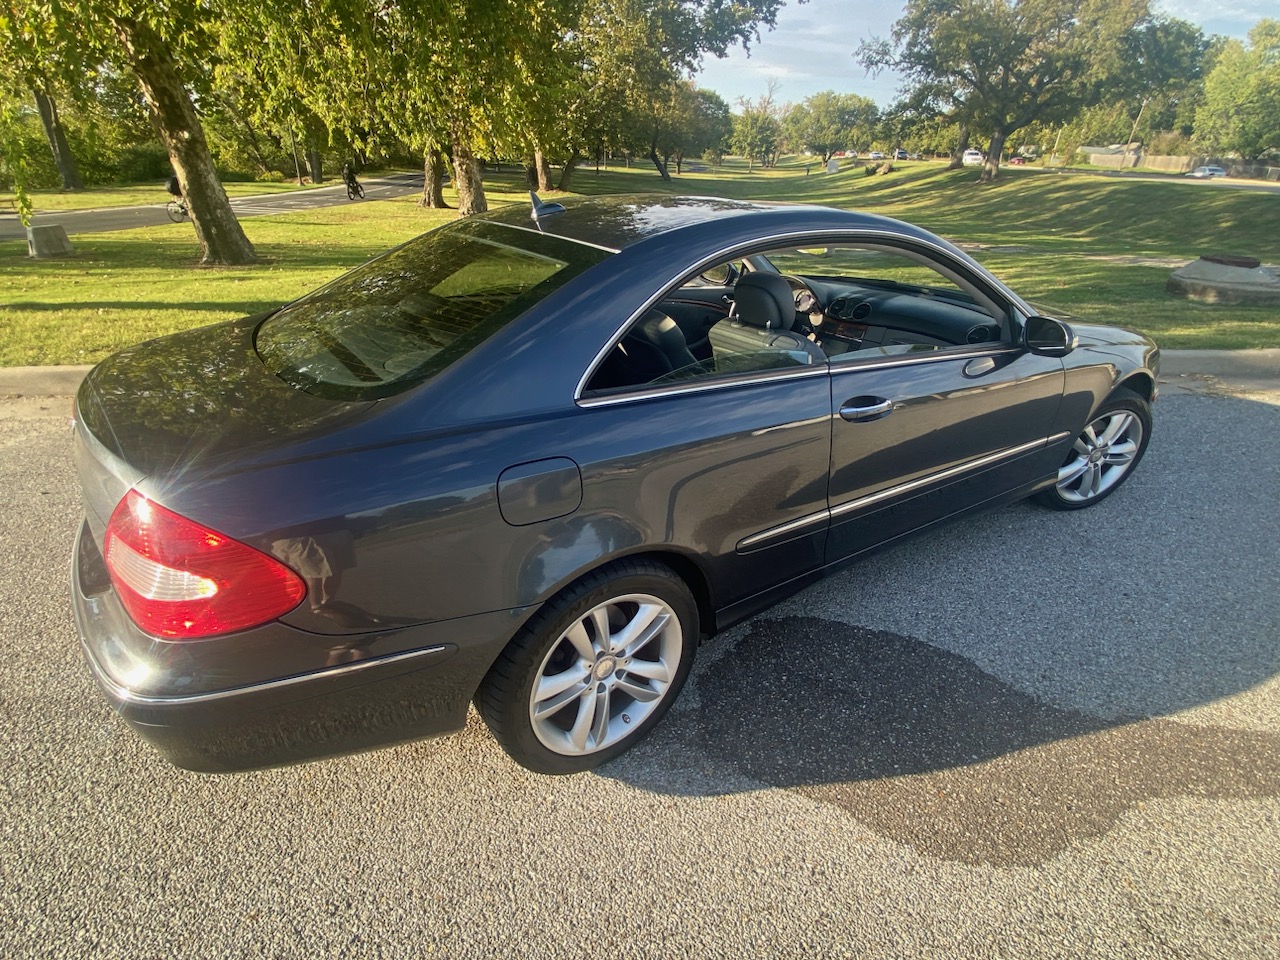 Used Mercedes-Benz CLK 350 for Sale Right Now - Autotrader